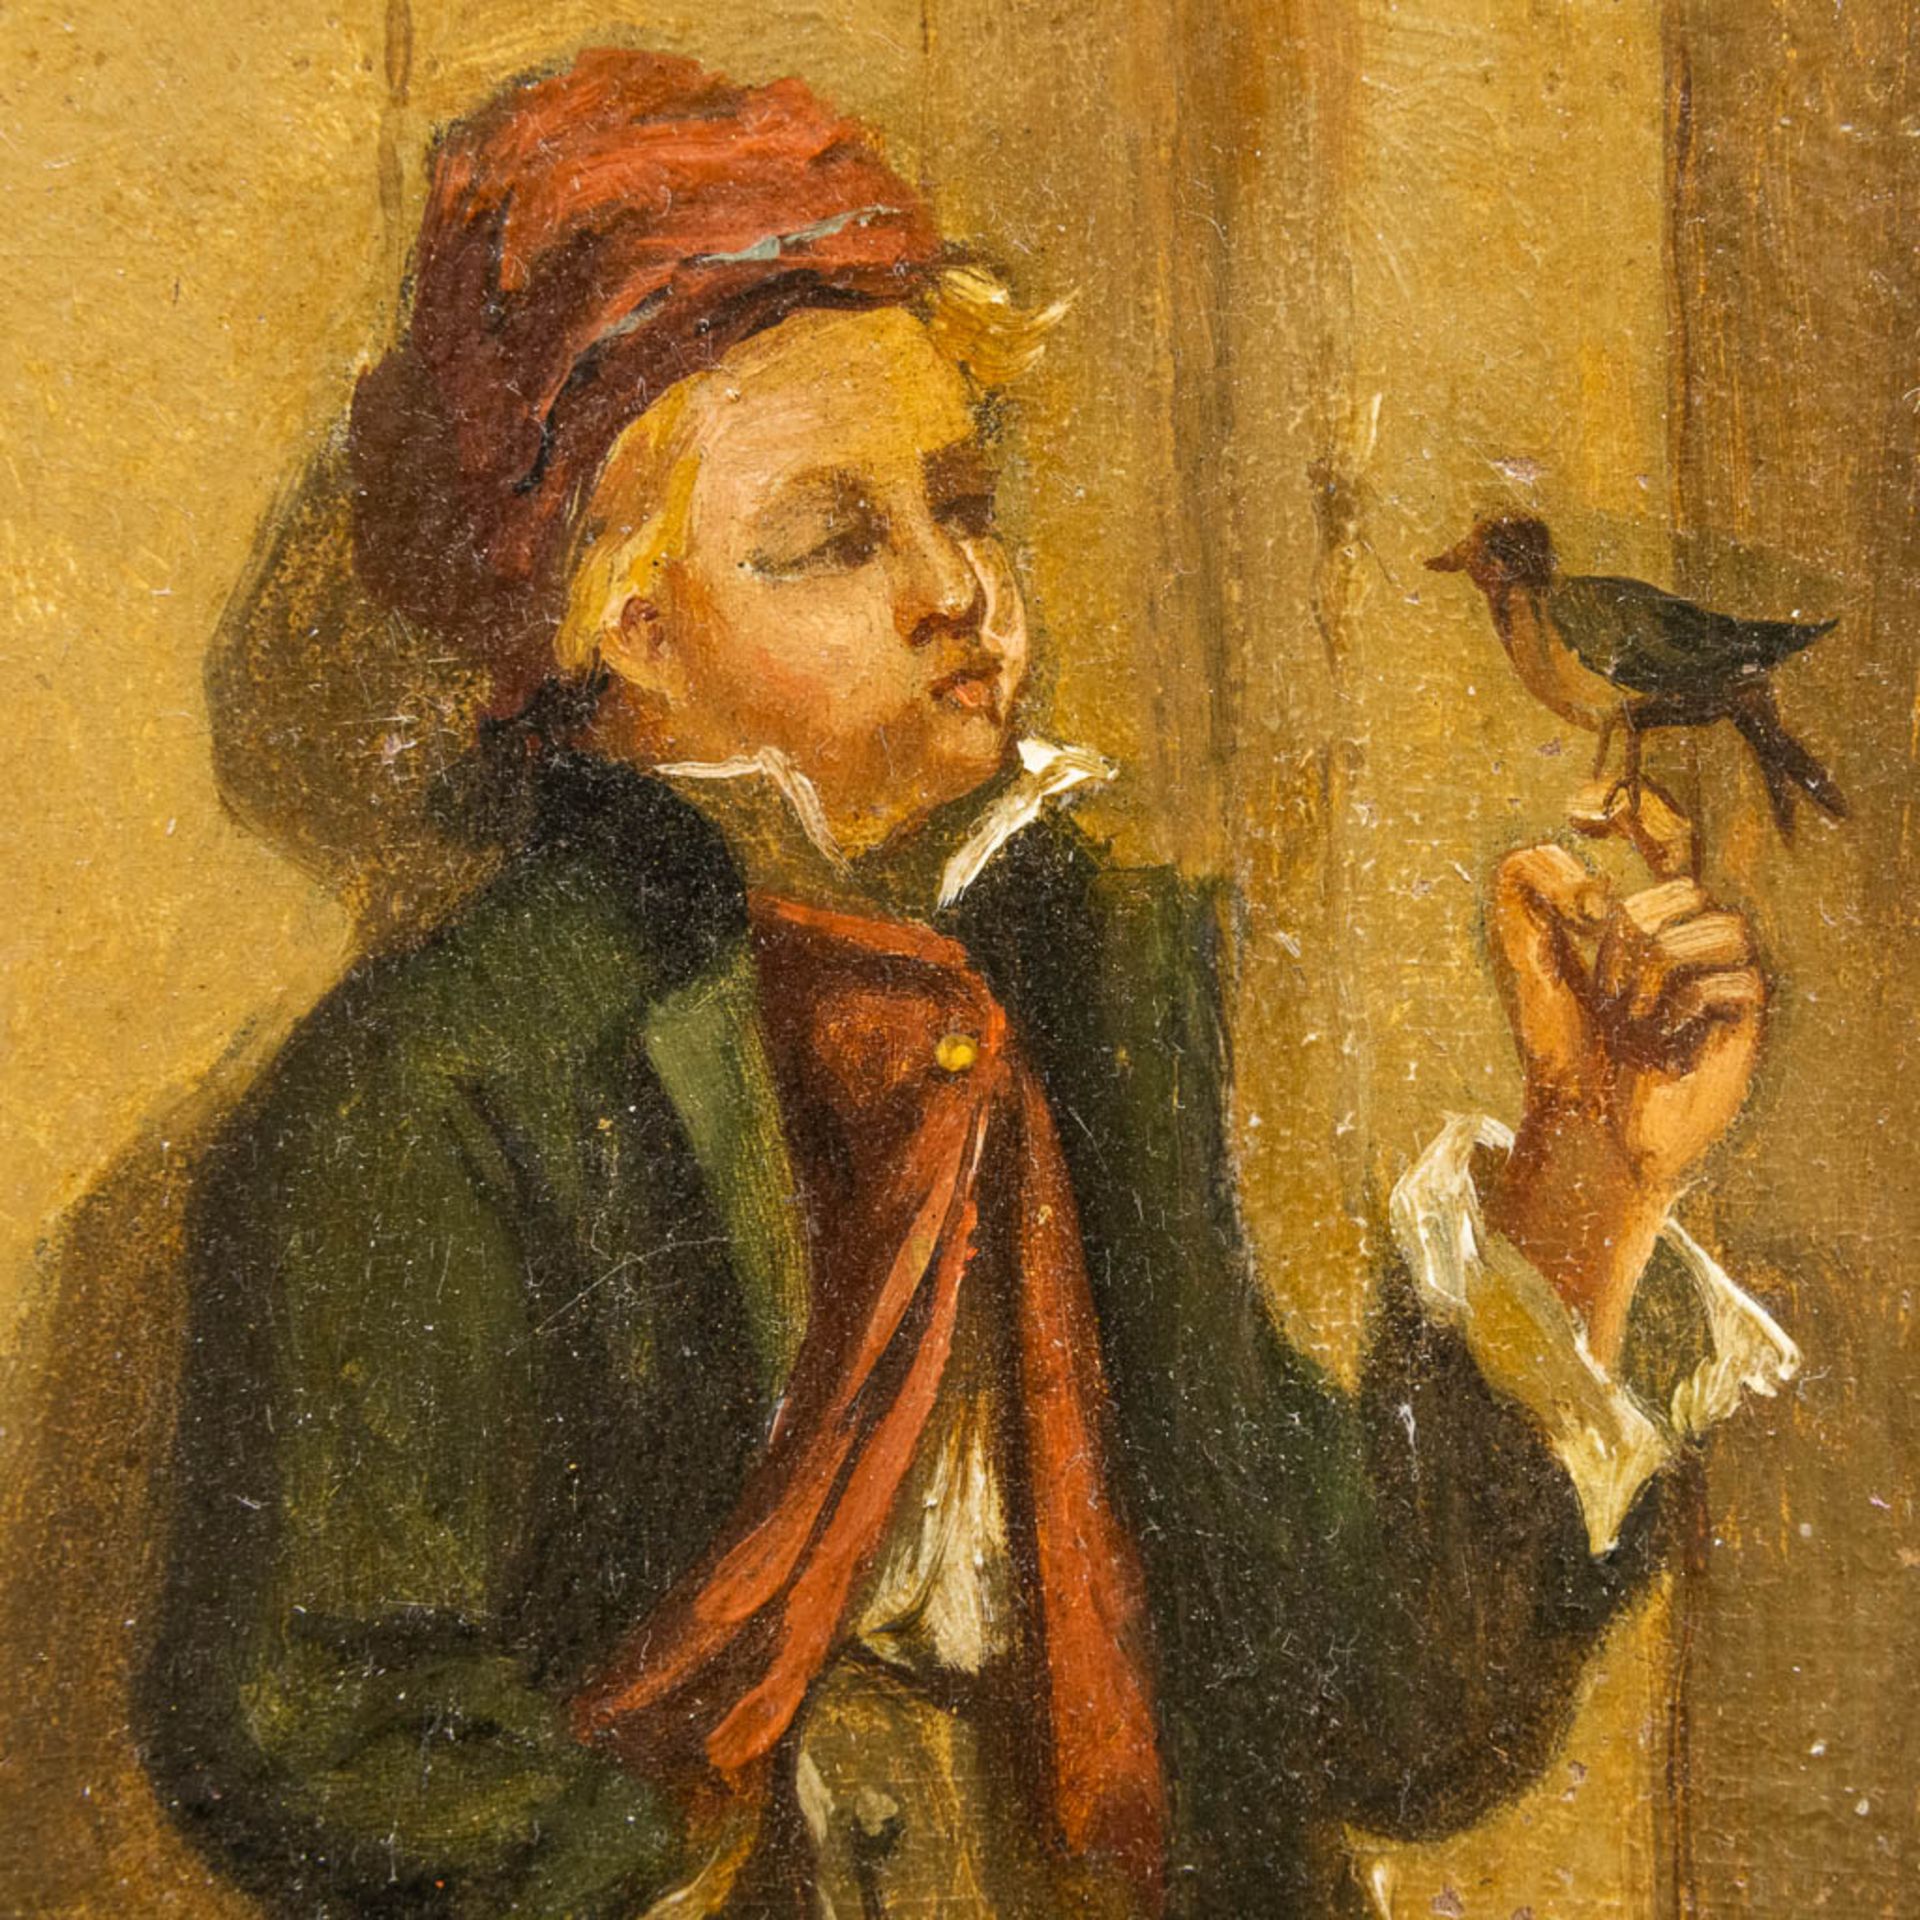 F. NOEL, elegant image of a boy with a bird, oil on panel. (16 x 21 cm) - Image 5 of 6